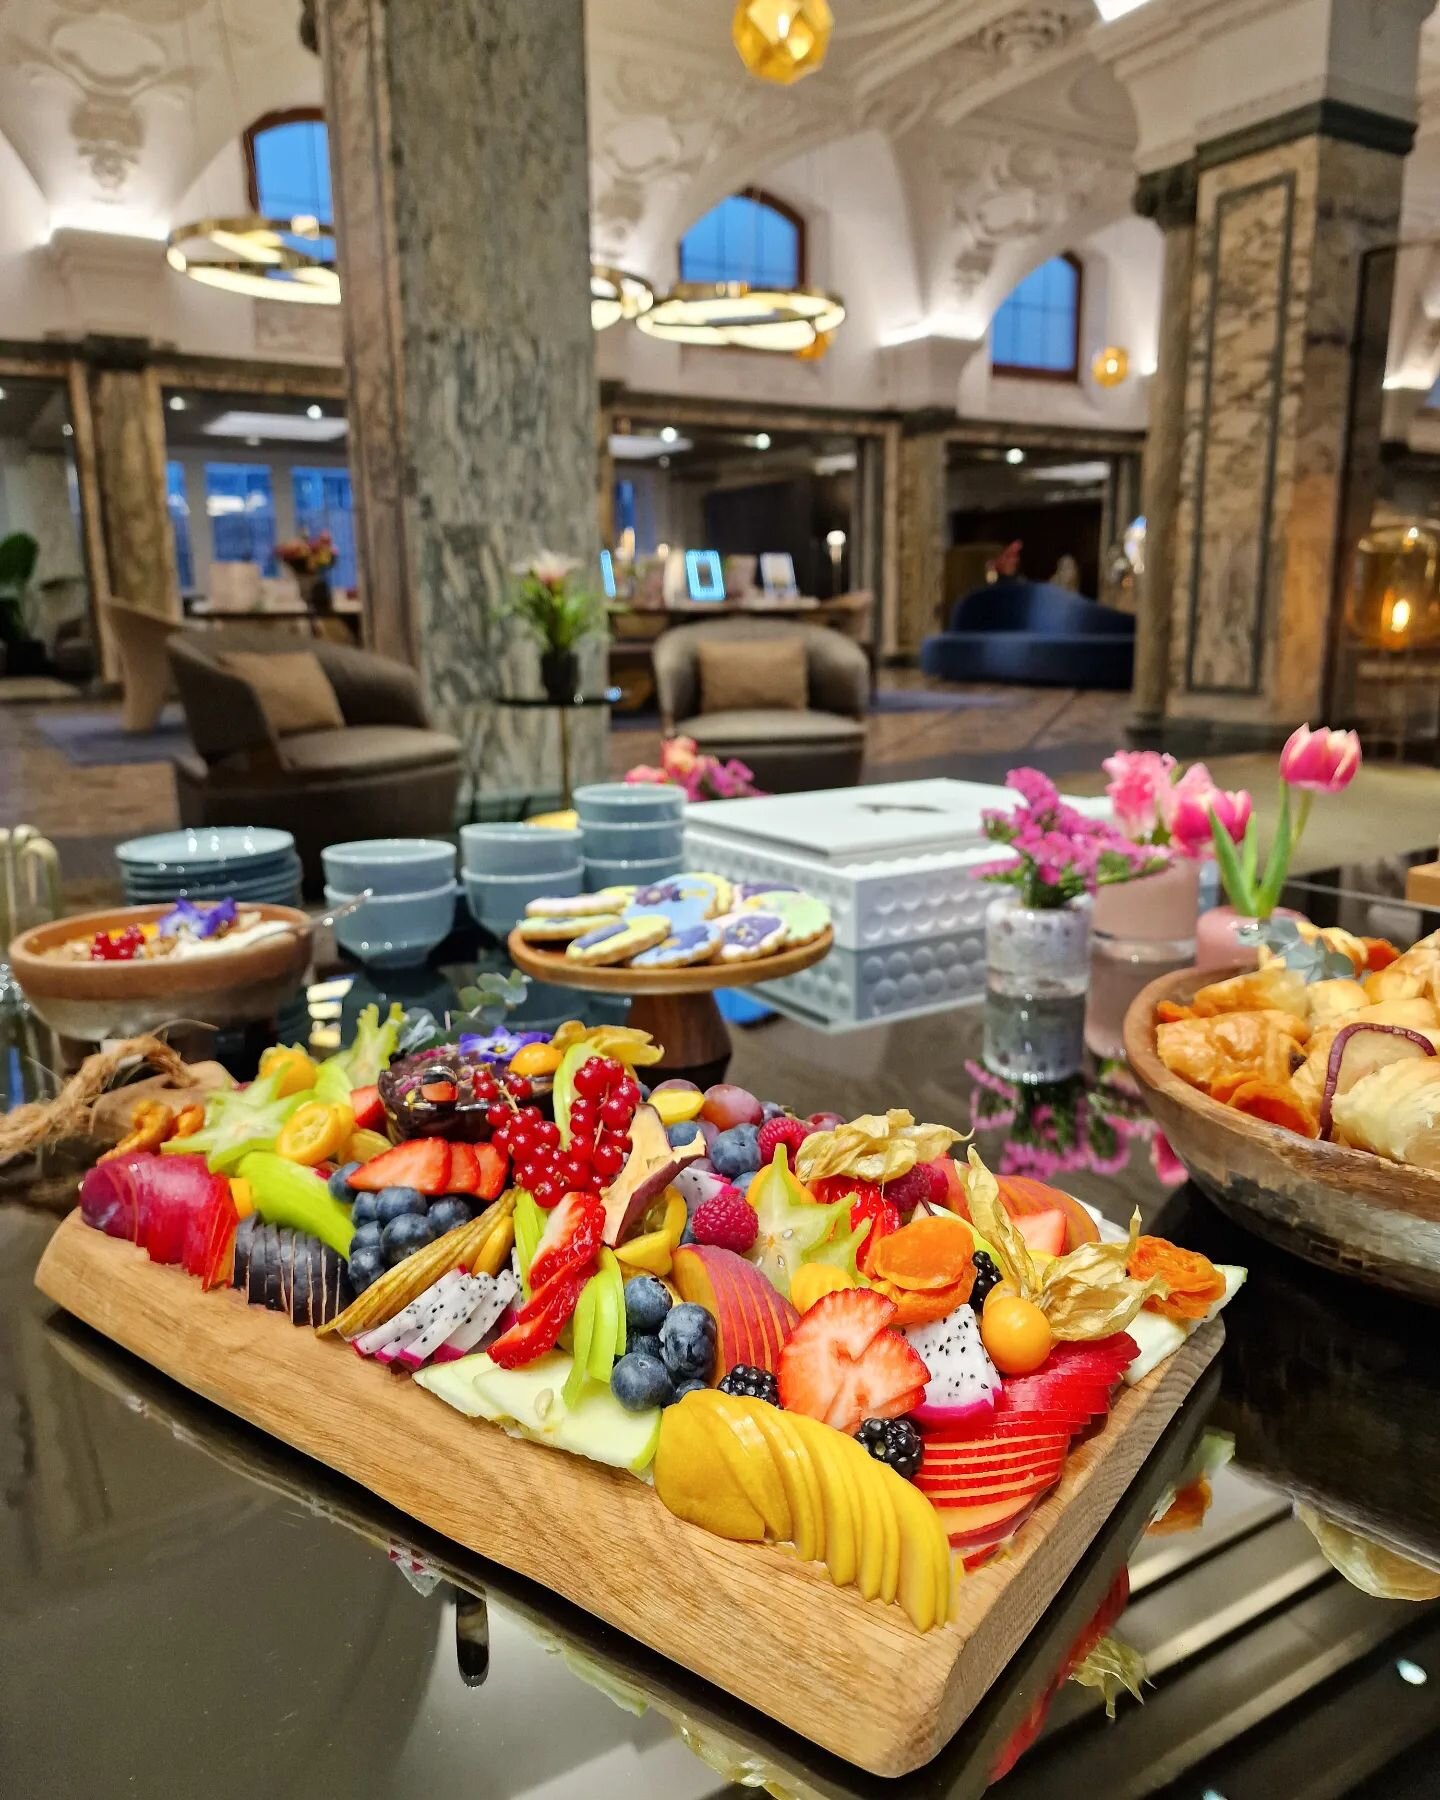 Fruity and colorful &quot;ladies breakfast&quot; from our recent event at Audemars Piguet in Bahnhofstrasse. Freshly baked pastries, fruit, Greek joghurt topped with fruit &amp; granola, dark chocolate ganache and our signature flower cookies. Delici